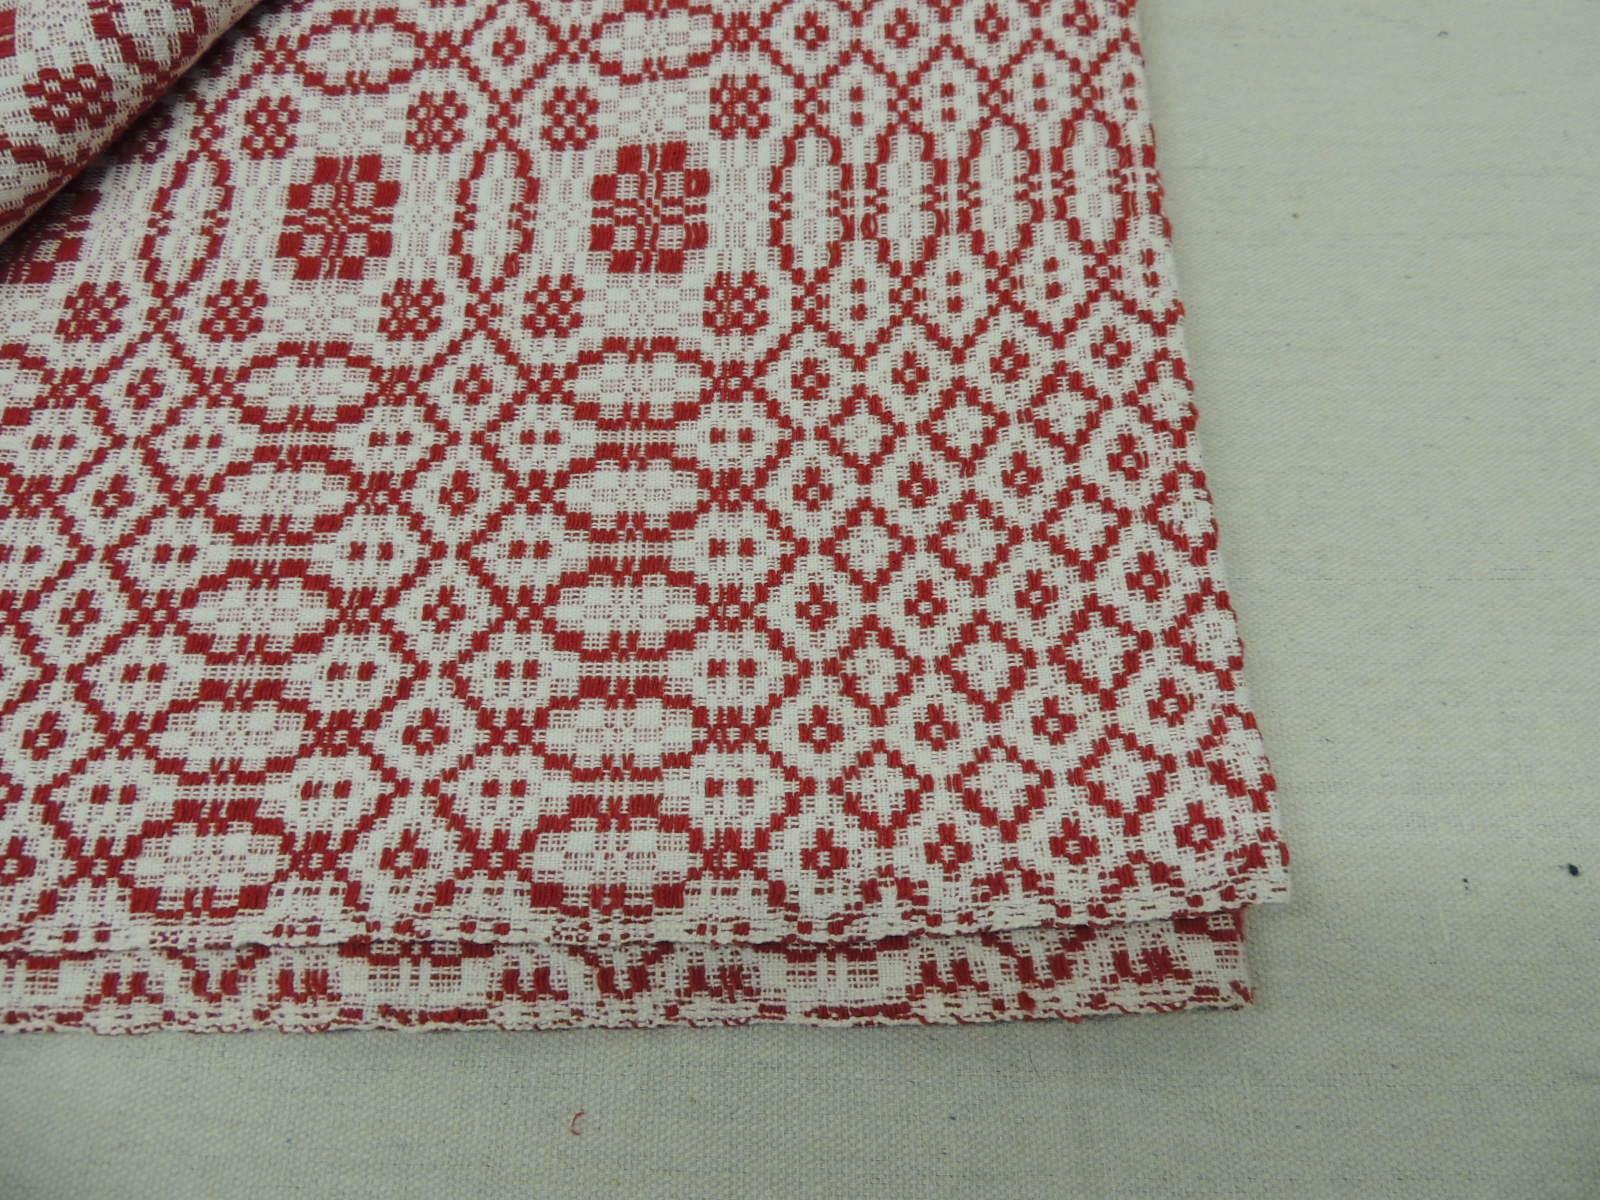 Adirondack Red and White Americana Jacquard Woven Blanket/Coverlet